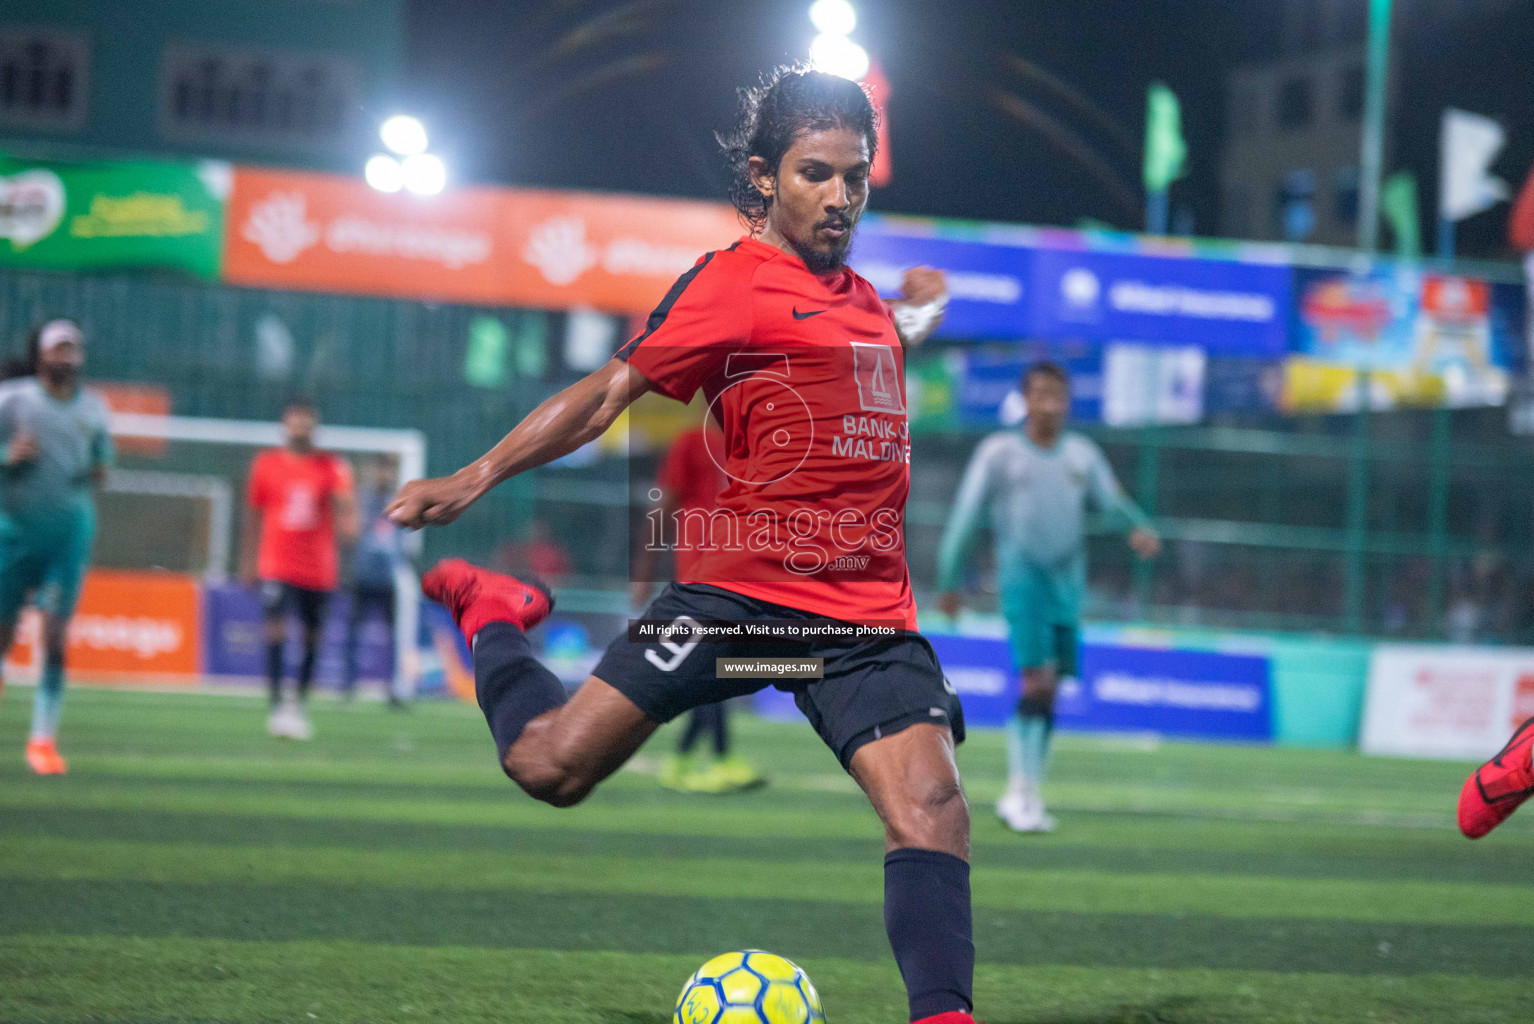 United BML vs Club Wamco in the finals of Club Maldives Cup 2019 on 3rd May 2019, held in Male', Maldives. Photos: Ismail Thoriq & Shuadhu Abdul Sattar/images.mv